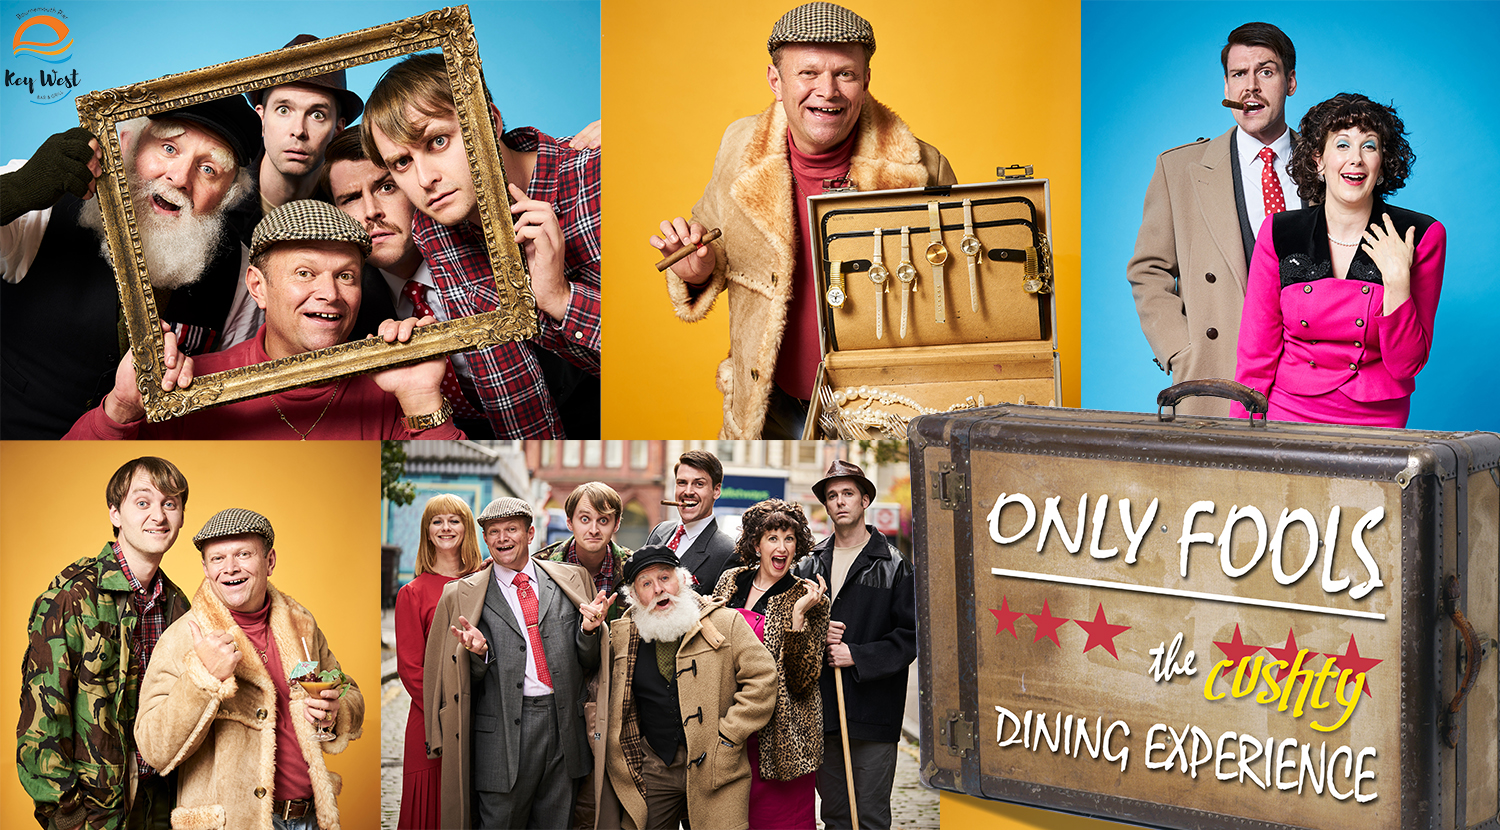 Only Fools & Horses interactive dining Show on Bournemouth Pier